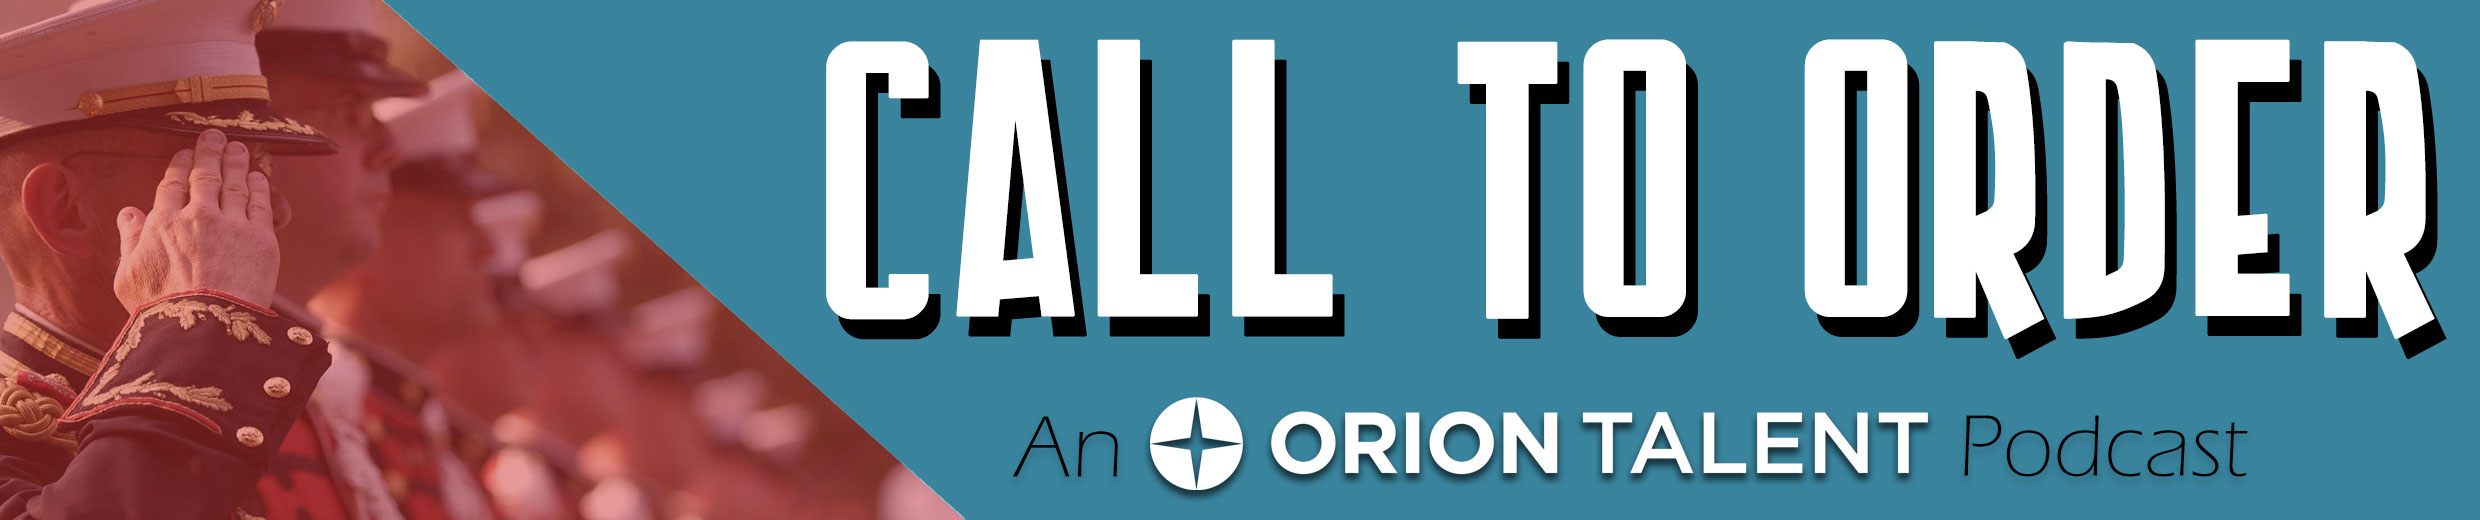 Call To Order, an Orion Talent Podcast